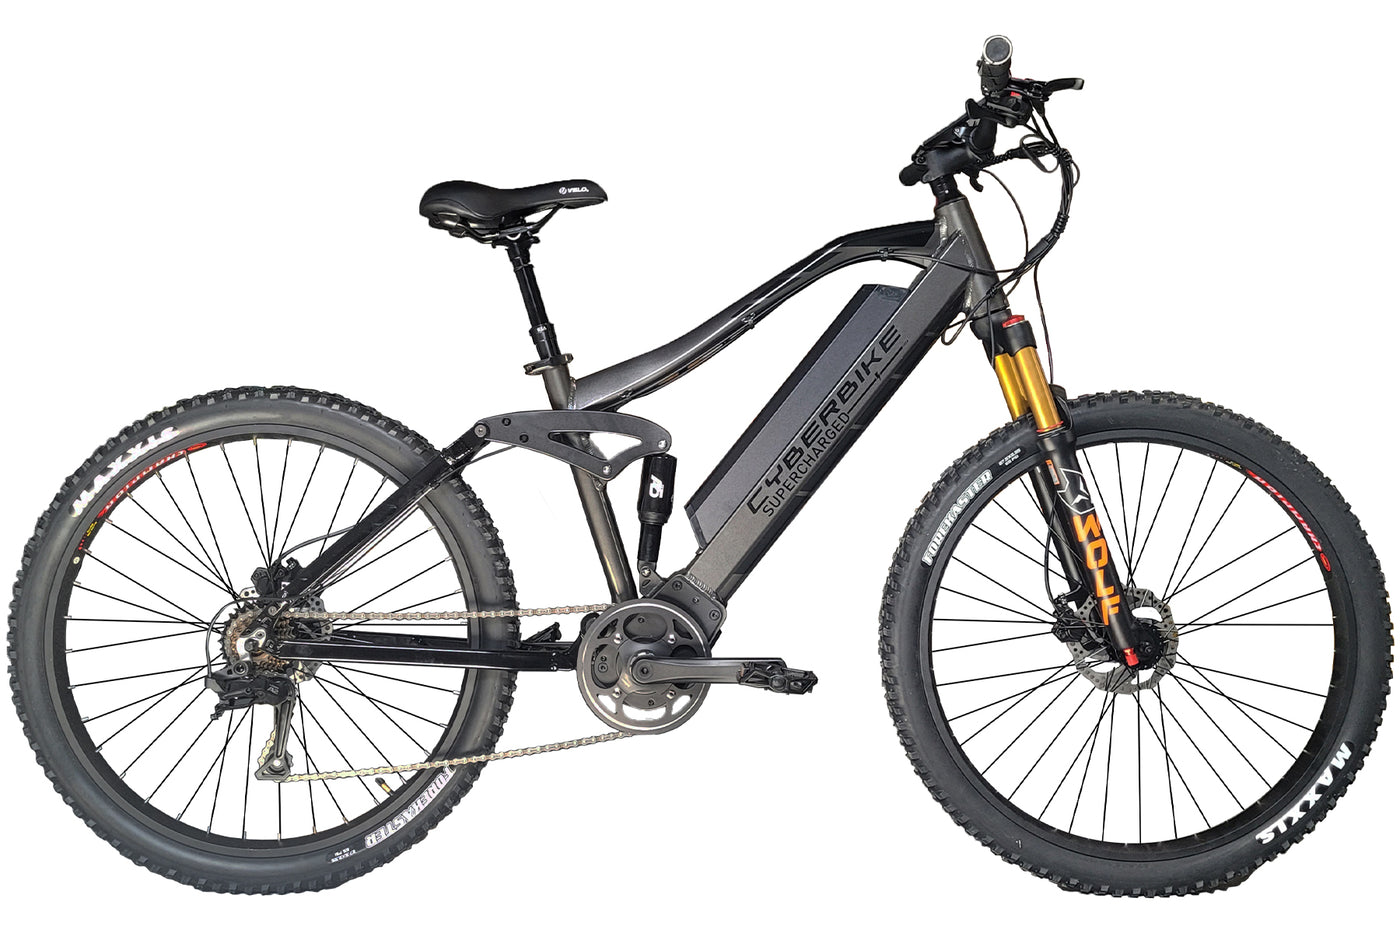 Cyberbike Bandit- Style and Performance in a mid-drive, full air suspension